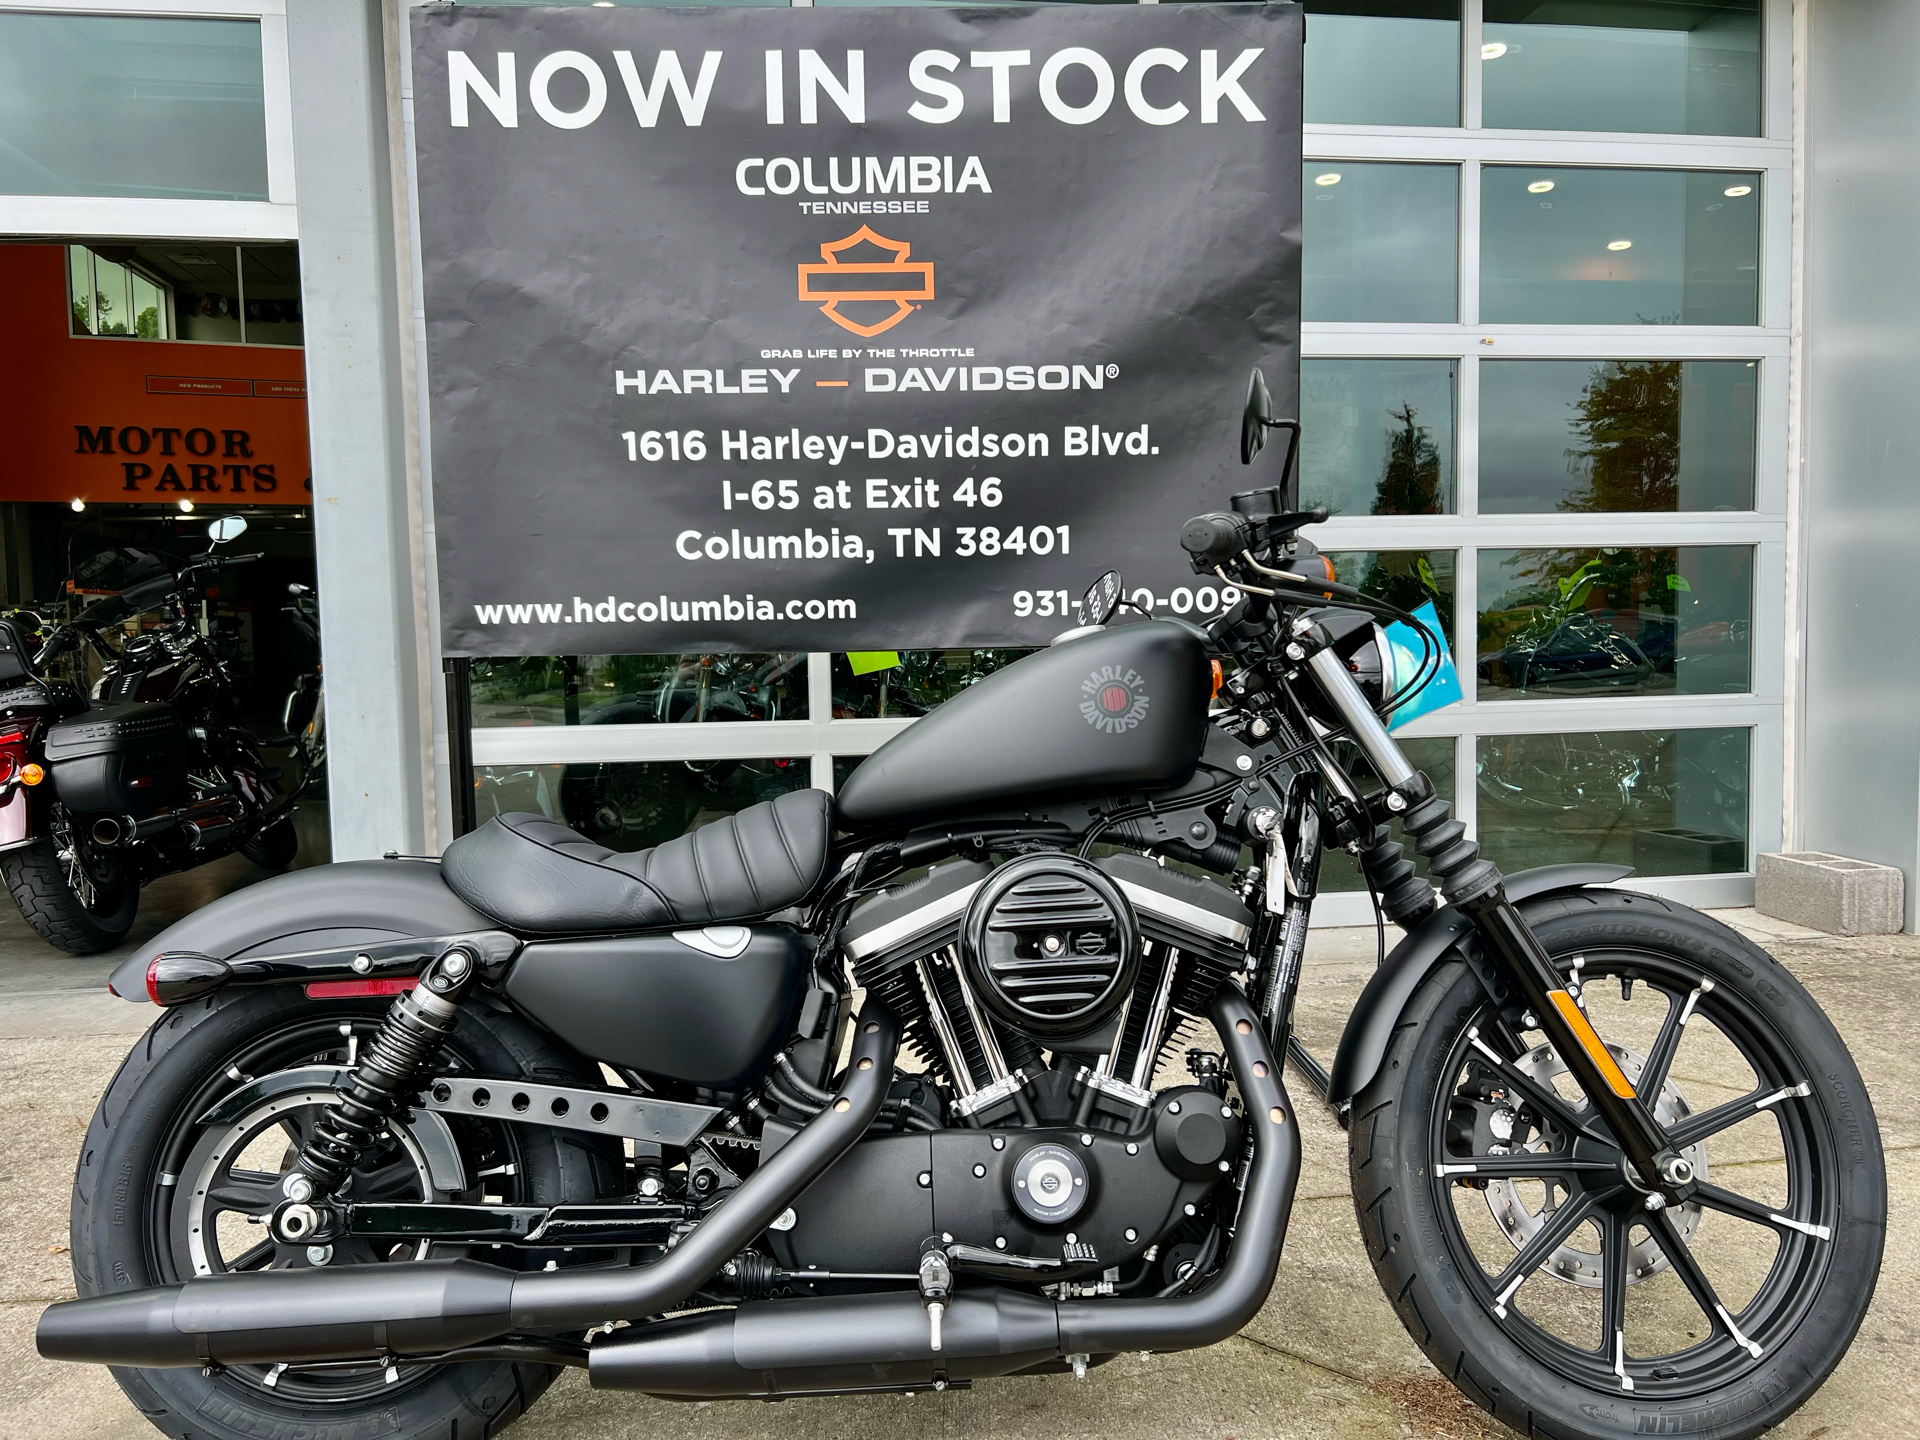 2022 Harley-Davidson XL883N in Columbia, Tennessee